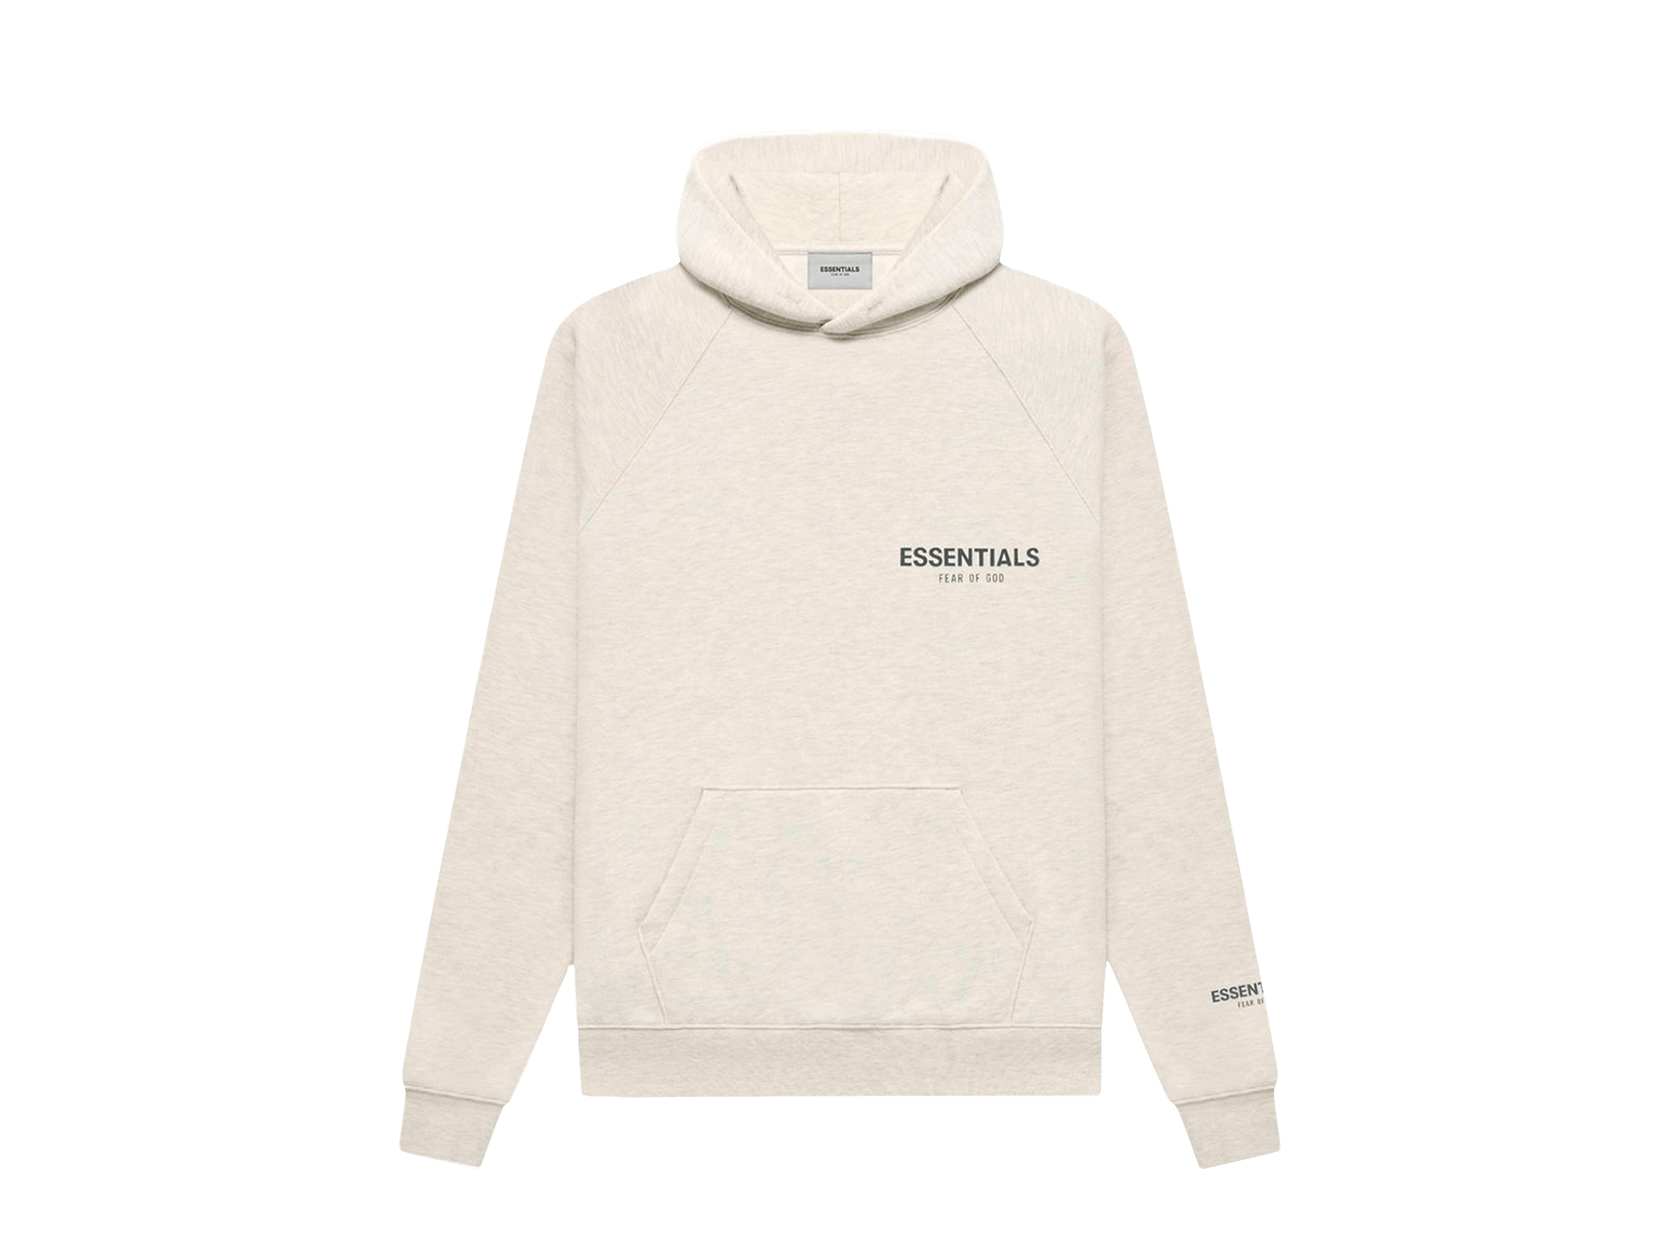 Double Boxed hoodie 159.99 FEAR OF GOD ESSENTIALS CORE PULLOVER HOODIE LIGHT OATMEAL Double Boxed